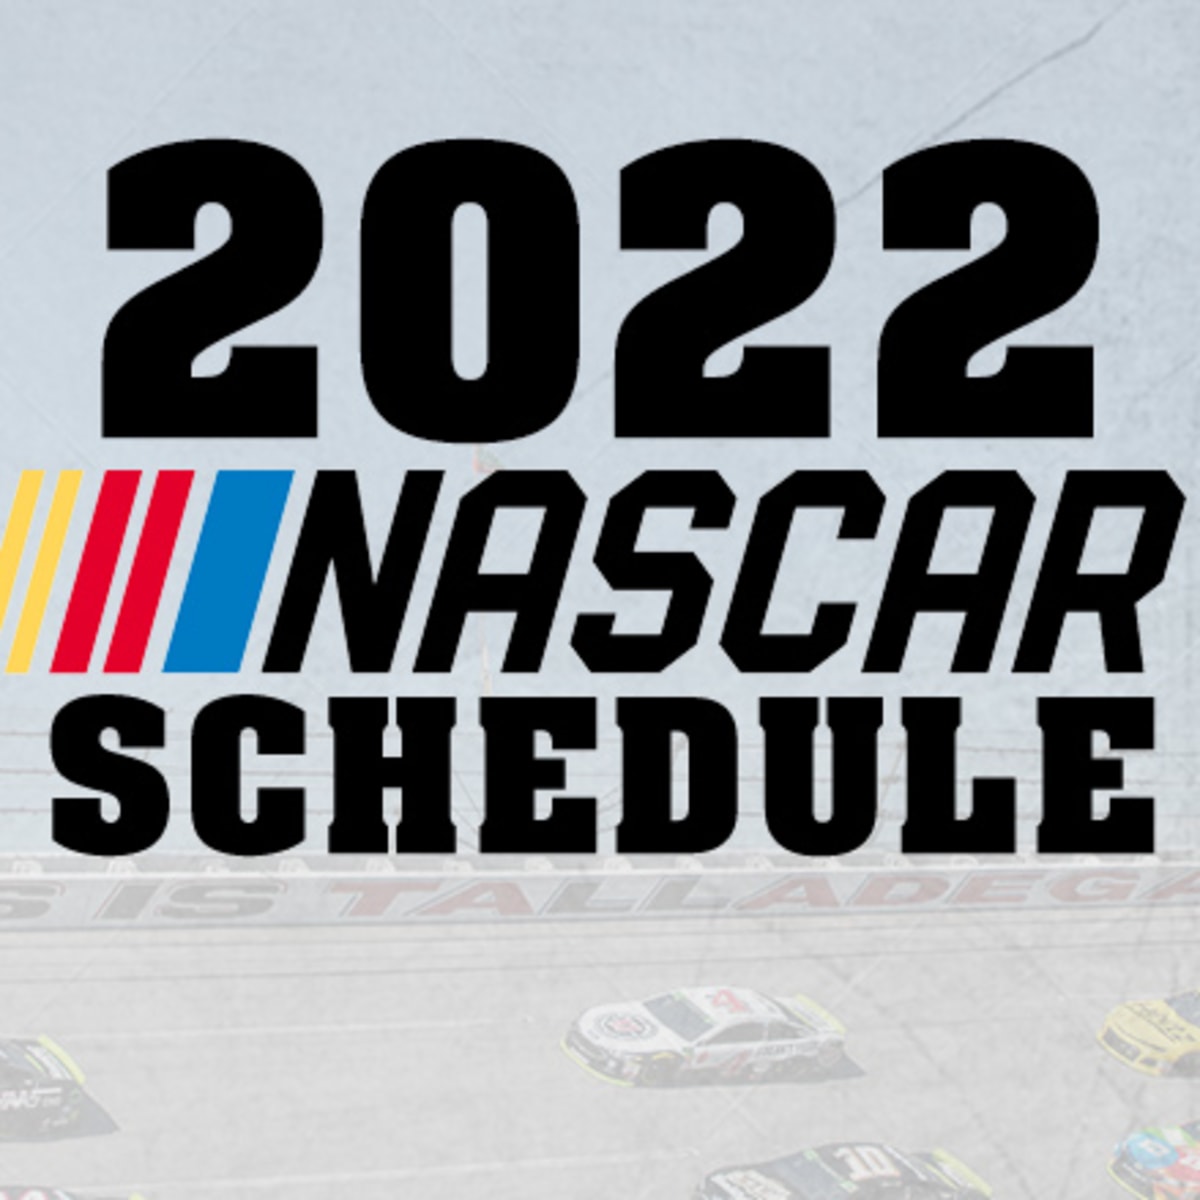 Nascar Schedule 2022 2022 Nascar Schedule: Nascar Cup Series - Athlonsports.com | Expert  Predictions, Picks, And Previews